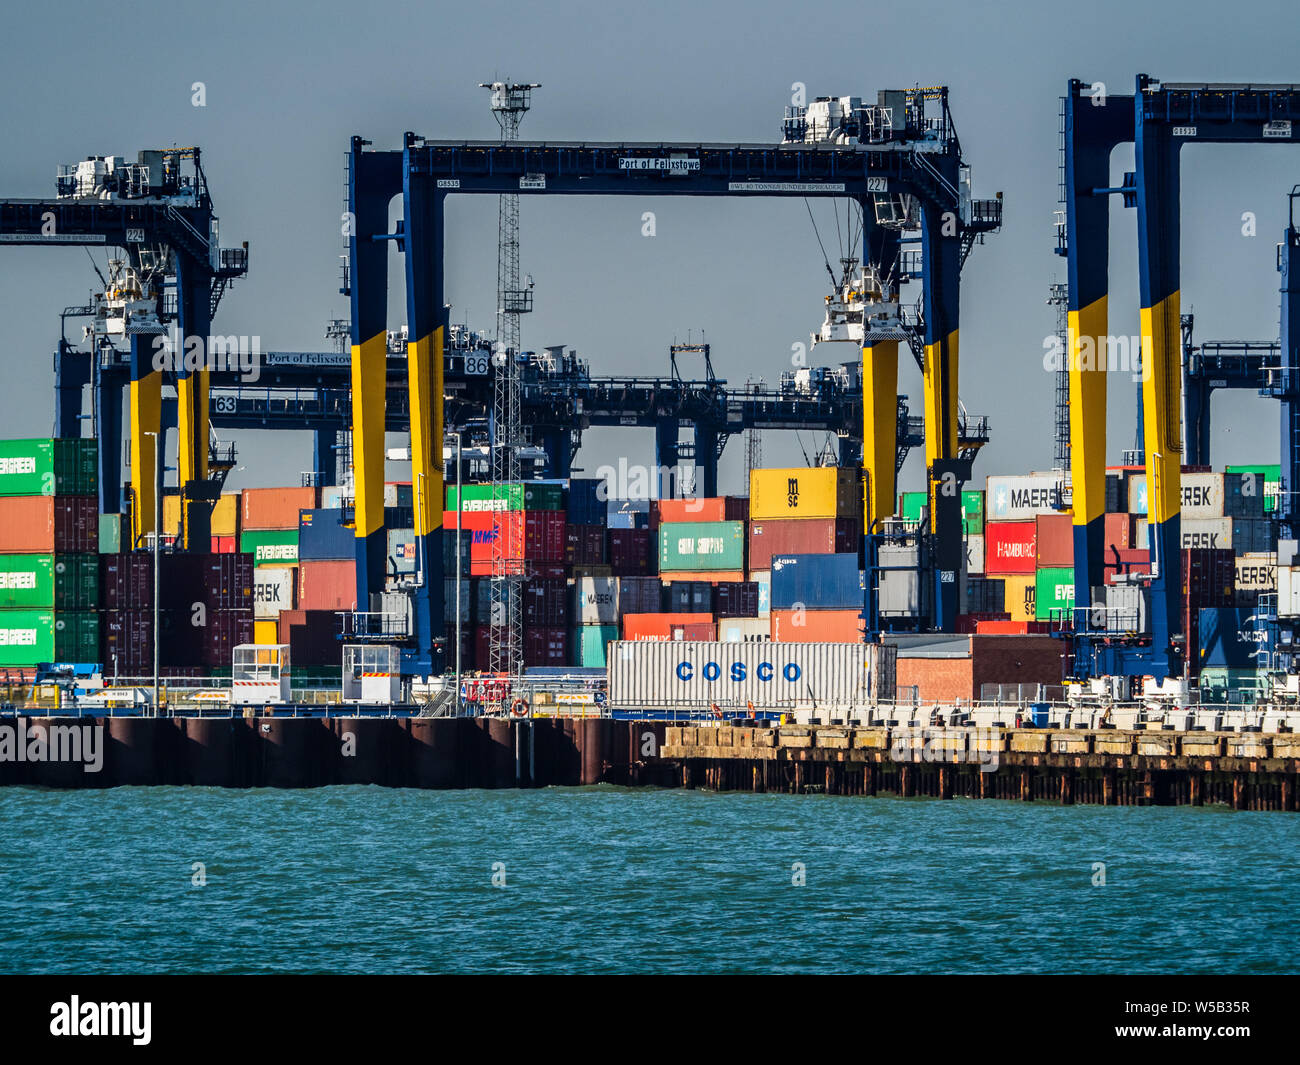 Container Freight Handling at the Port of Felixstowe, the UK's largest Container Port. Containers are loaded onto container trains for onward transit. Stock Photo